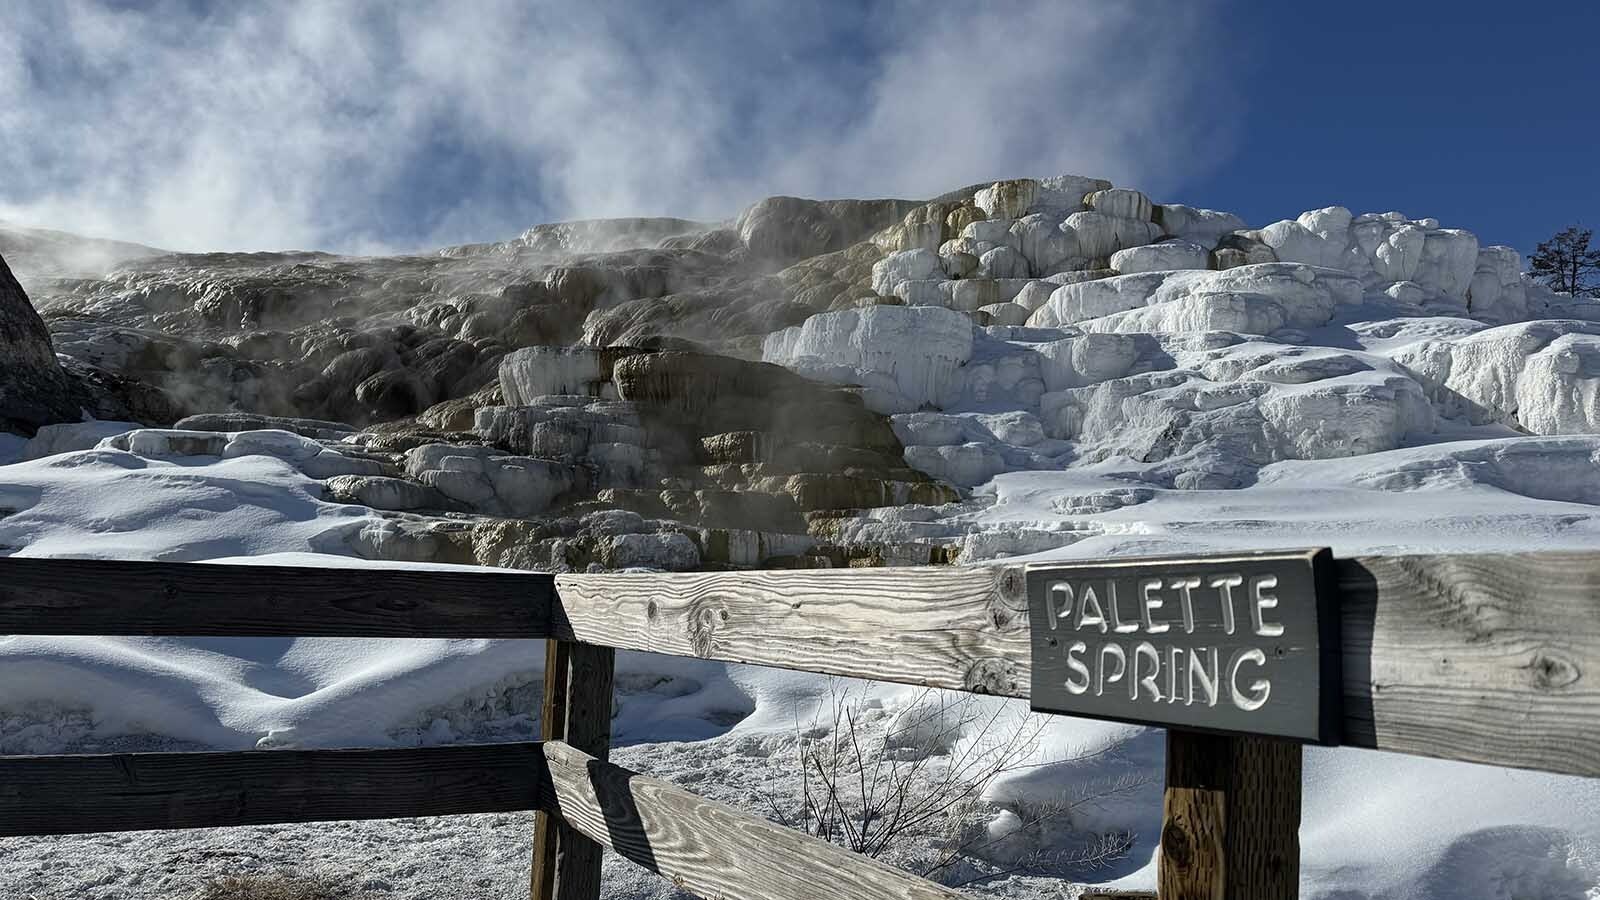 Palette Springs in Yellowstone National Park, where actor Pierce Brosnan stepped off the boardwalk in November 2023 to take a selfie. He was remorseful in pleading guilty March 14, 2024, and was fined $1,500.